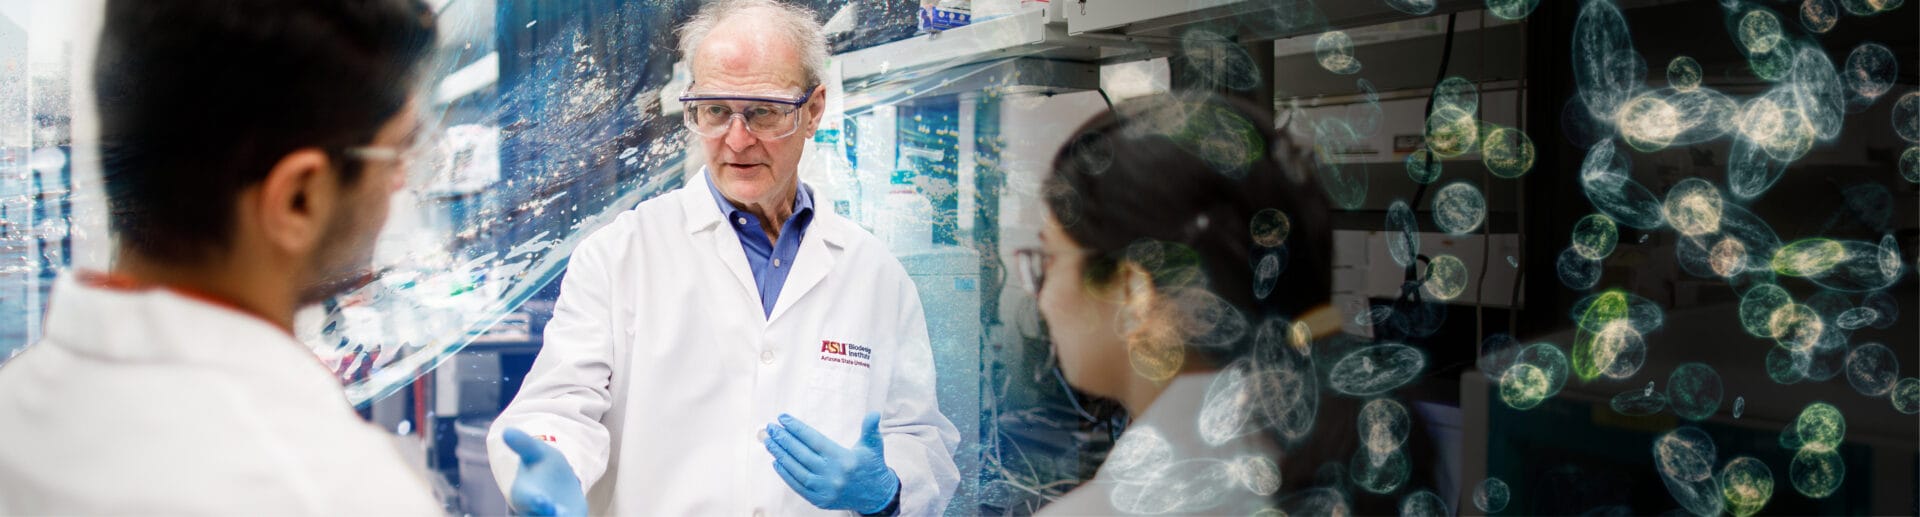 Bruce Rittmann in the lab with researchers